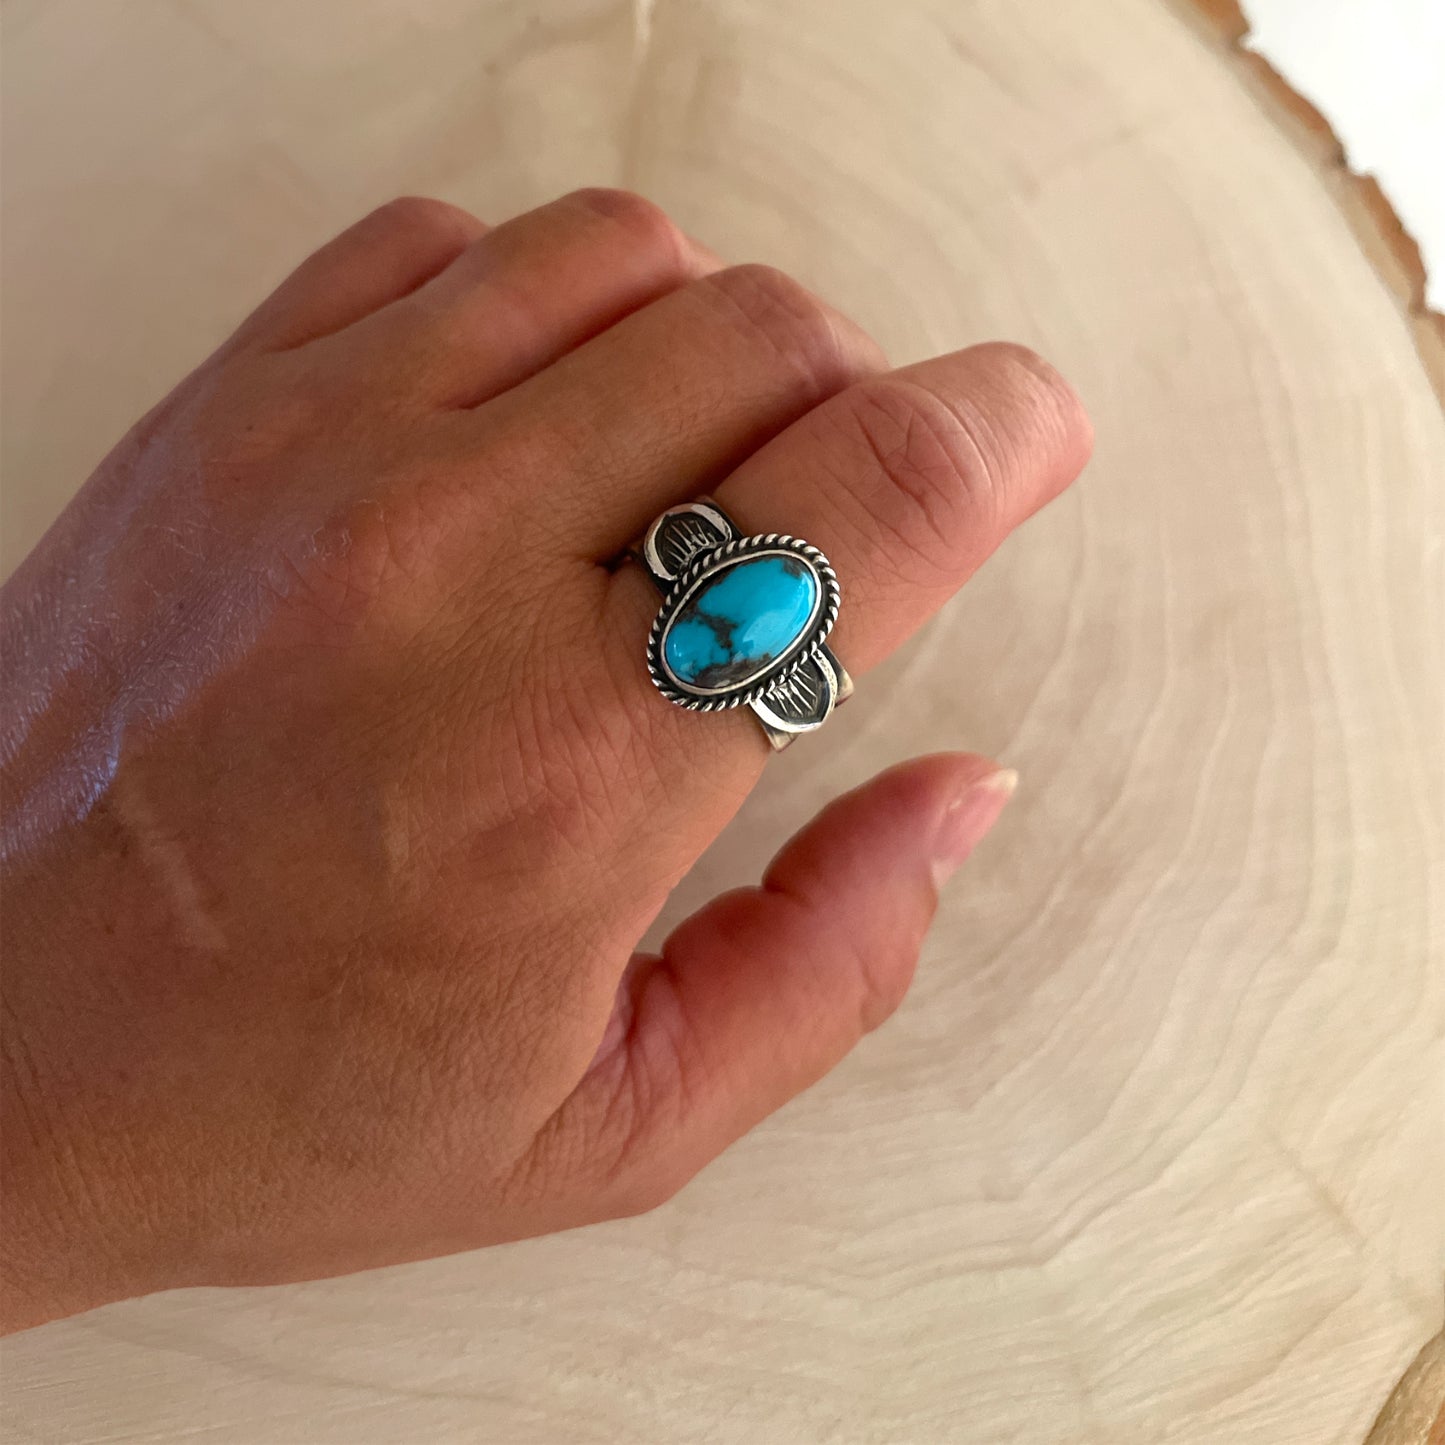 Stamped Kingman Turquoise Ring A By Sunshine Reeves Size 8.5